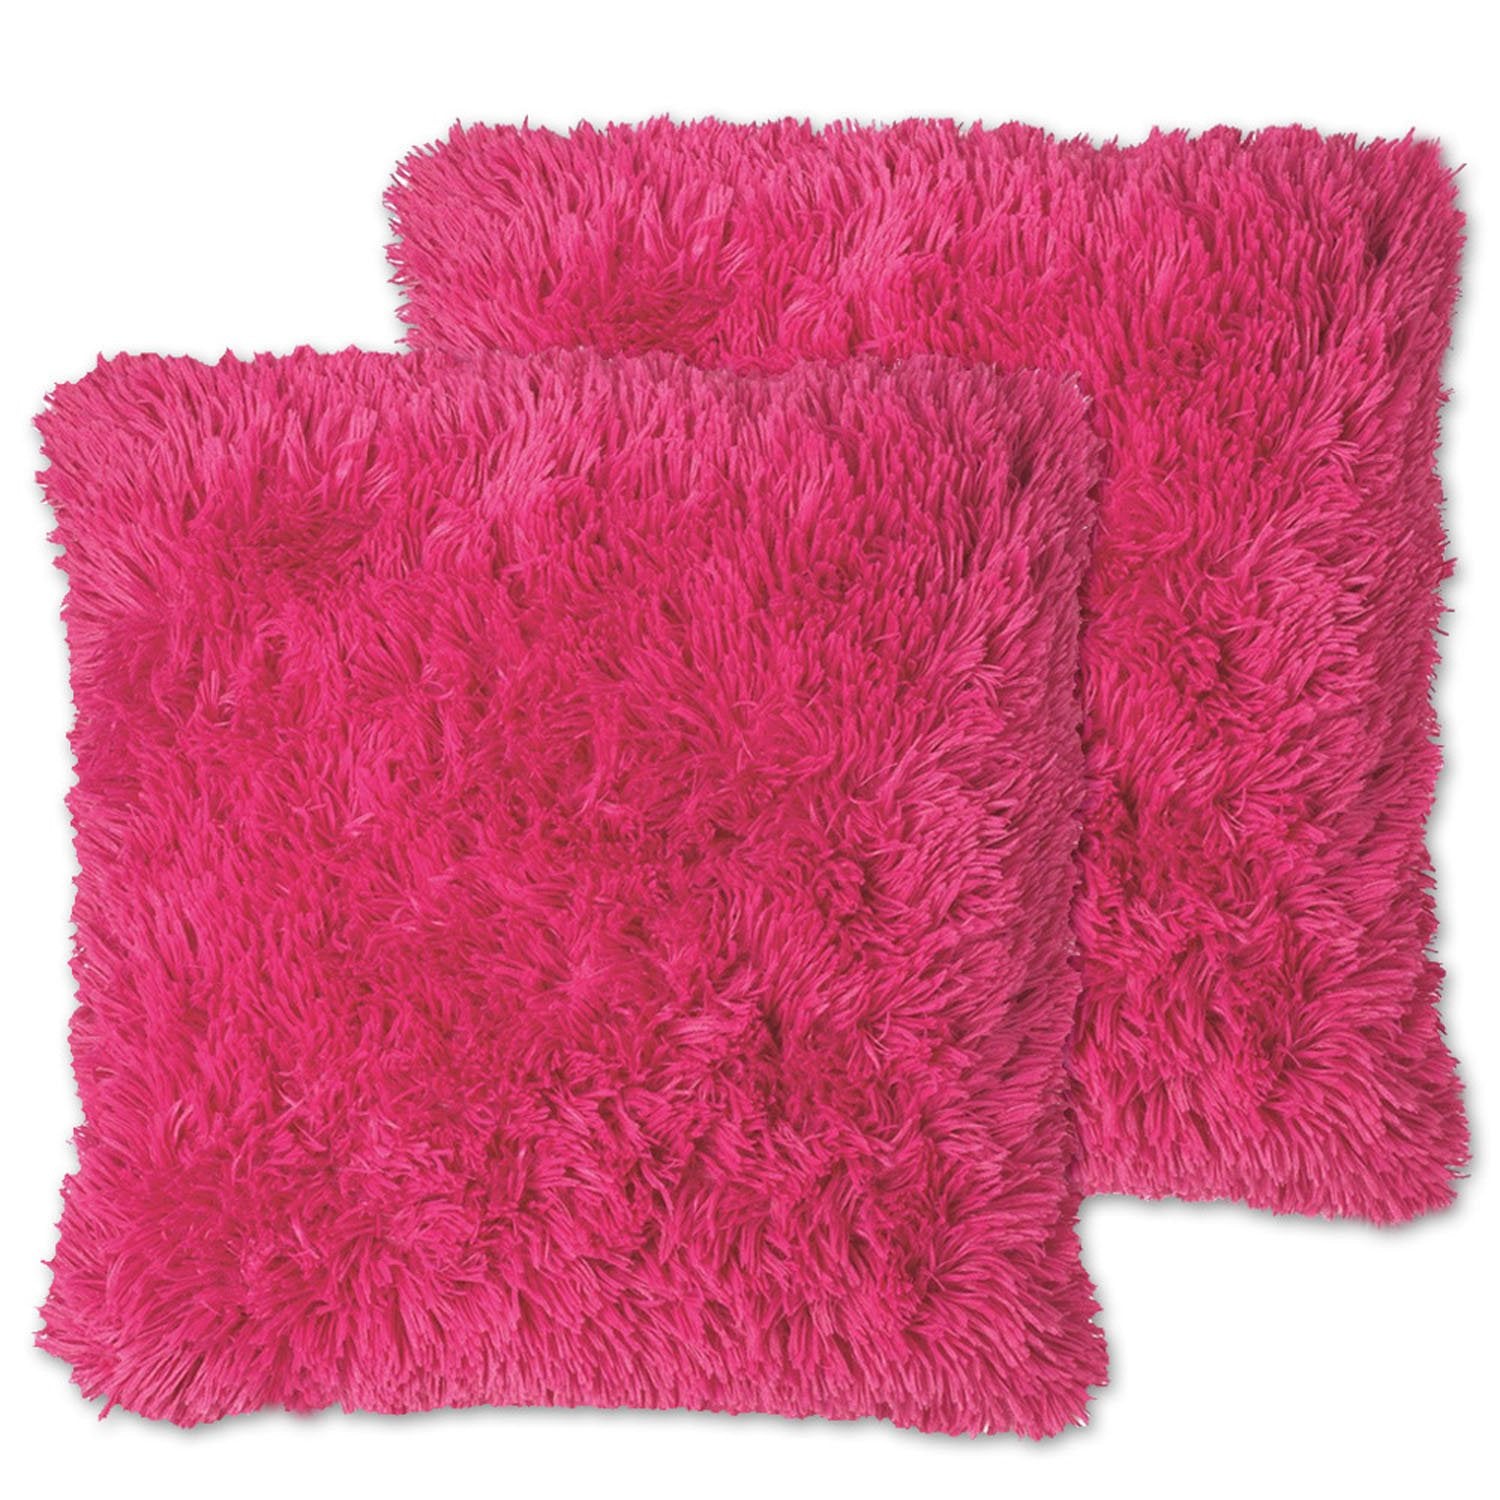 http://sweethomecollection.com/cdn/shop/products/decorative-plush-throw-pillows-2-pack-hot-pink-1-top.jpg?v=1650318097&width=2000